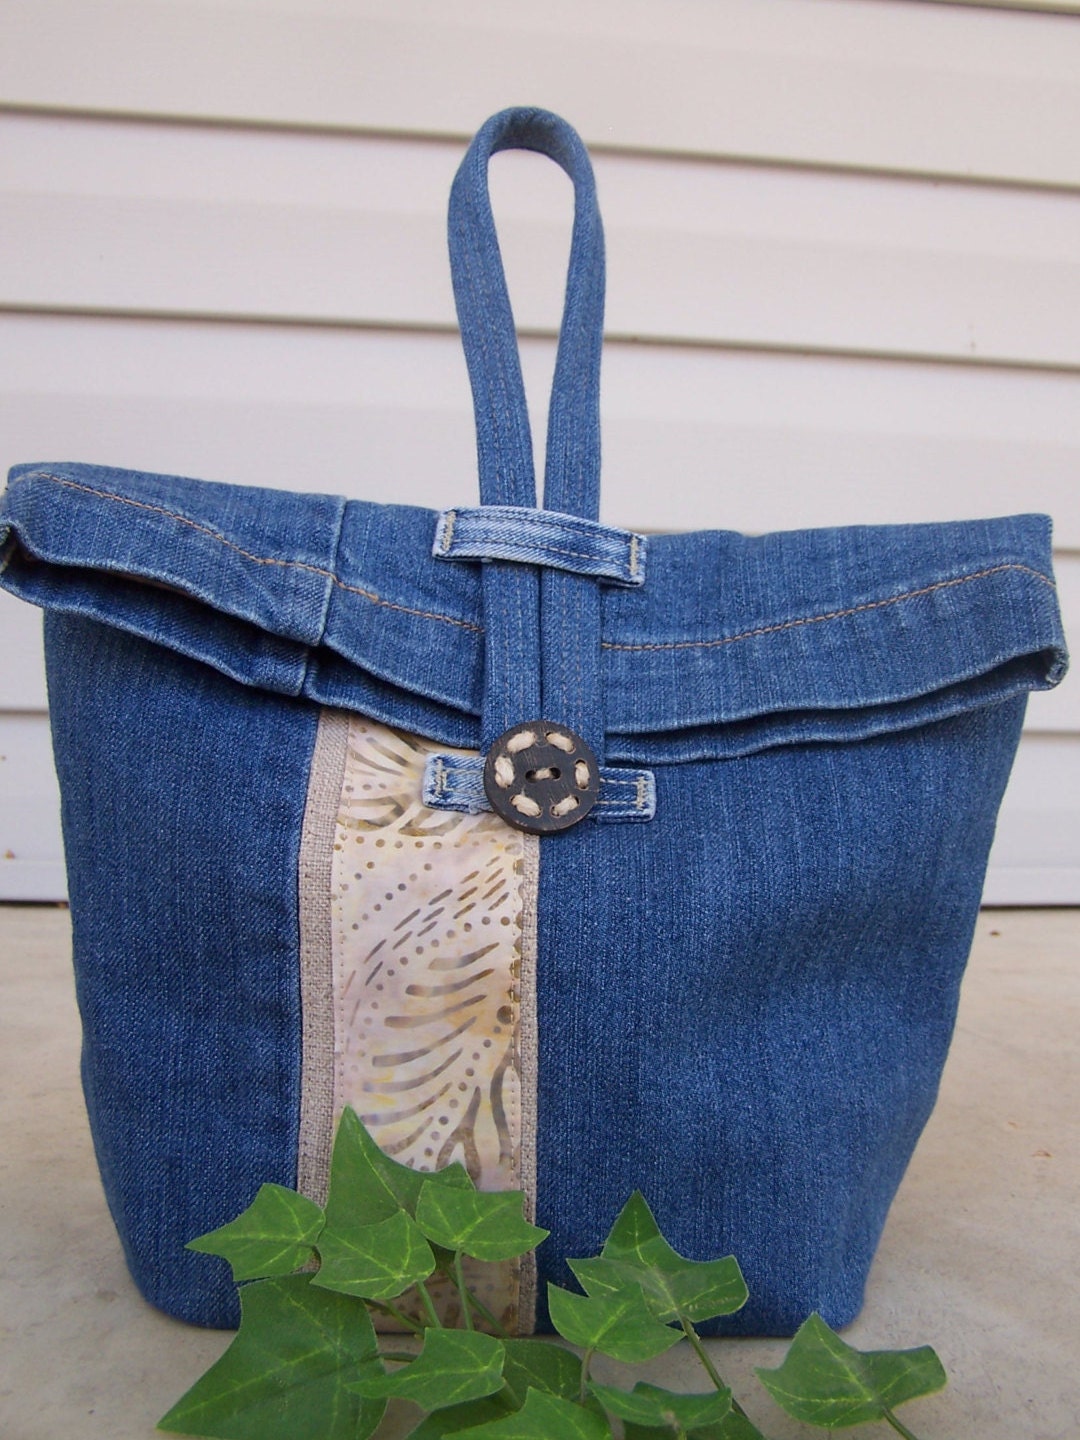 Insulated lunch bag recycled denim bag upcycled jeans linen